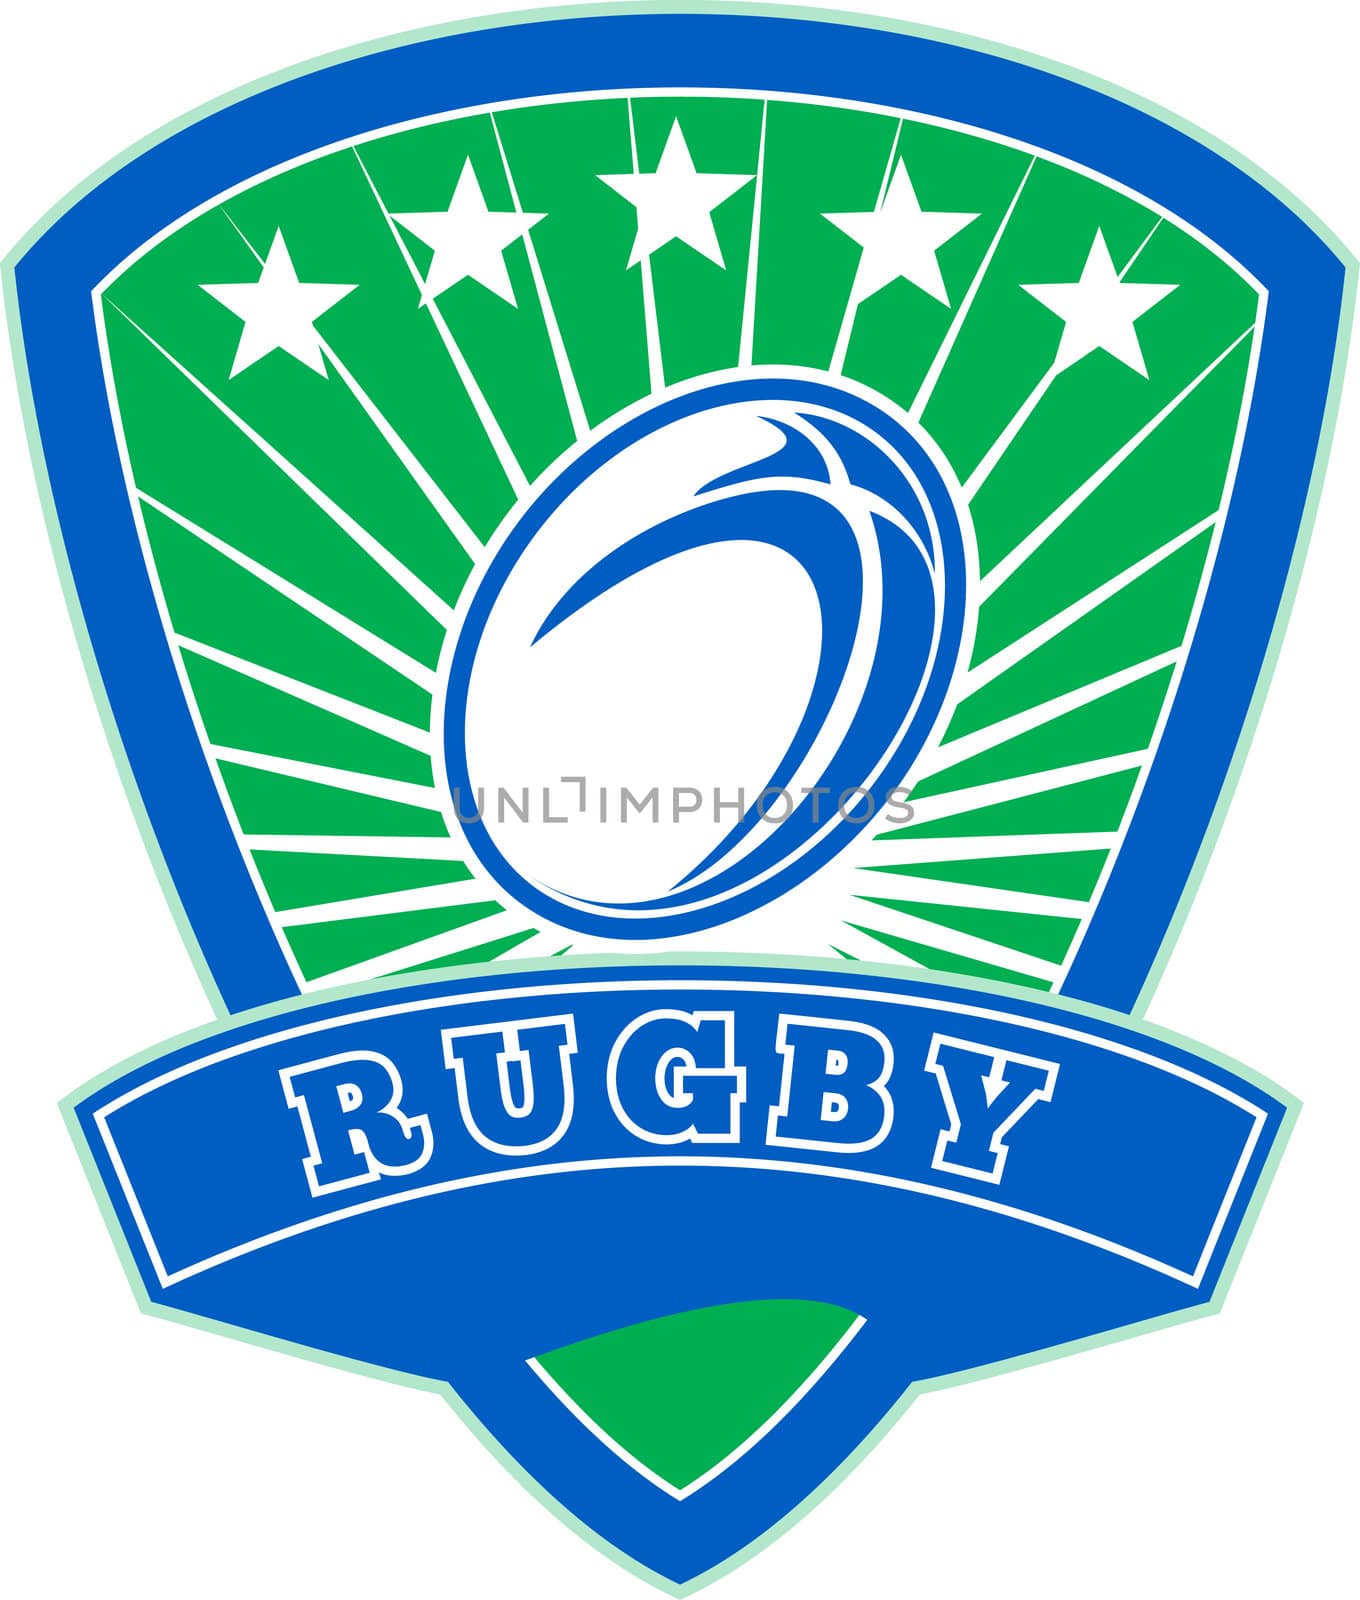 illustration of a rugby ball with stars and sunburst set inside shield with words "rugby"